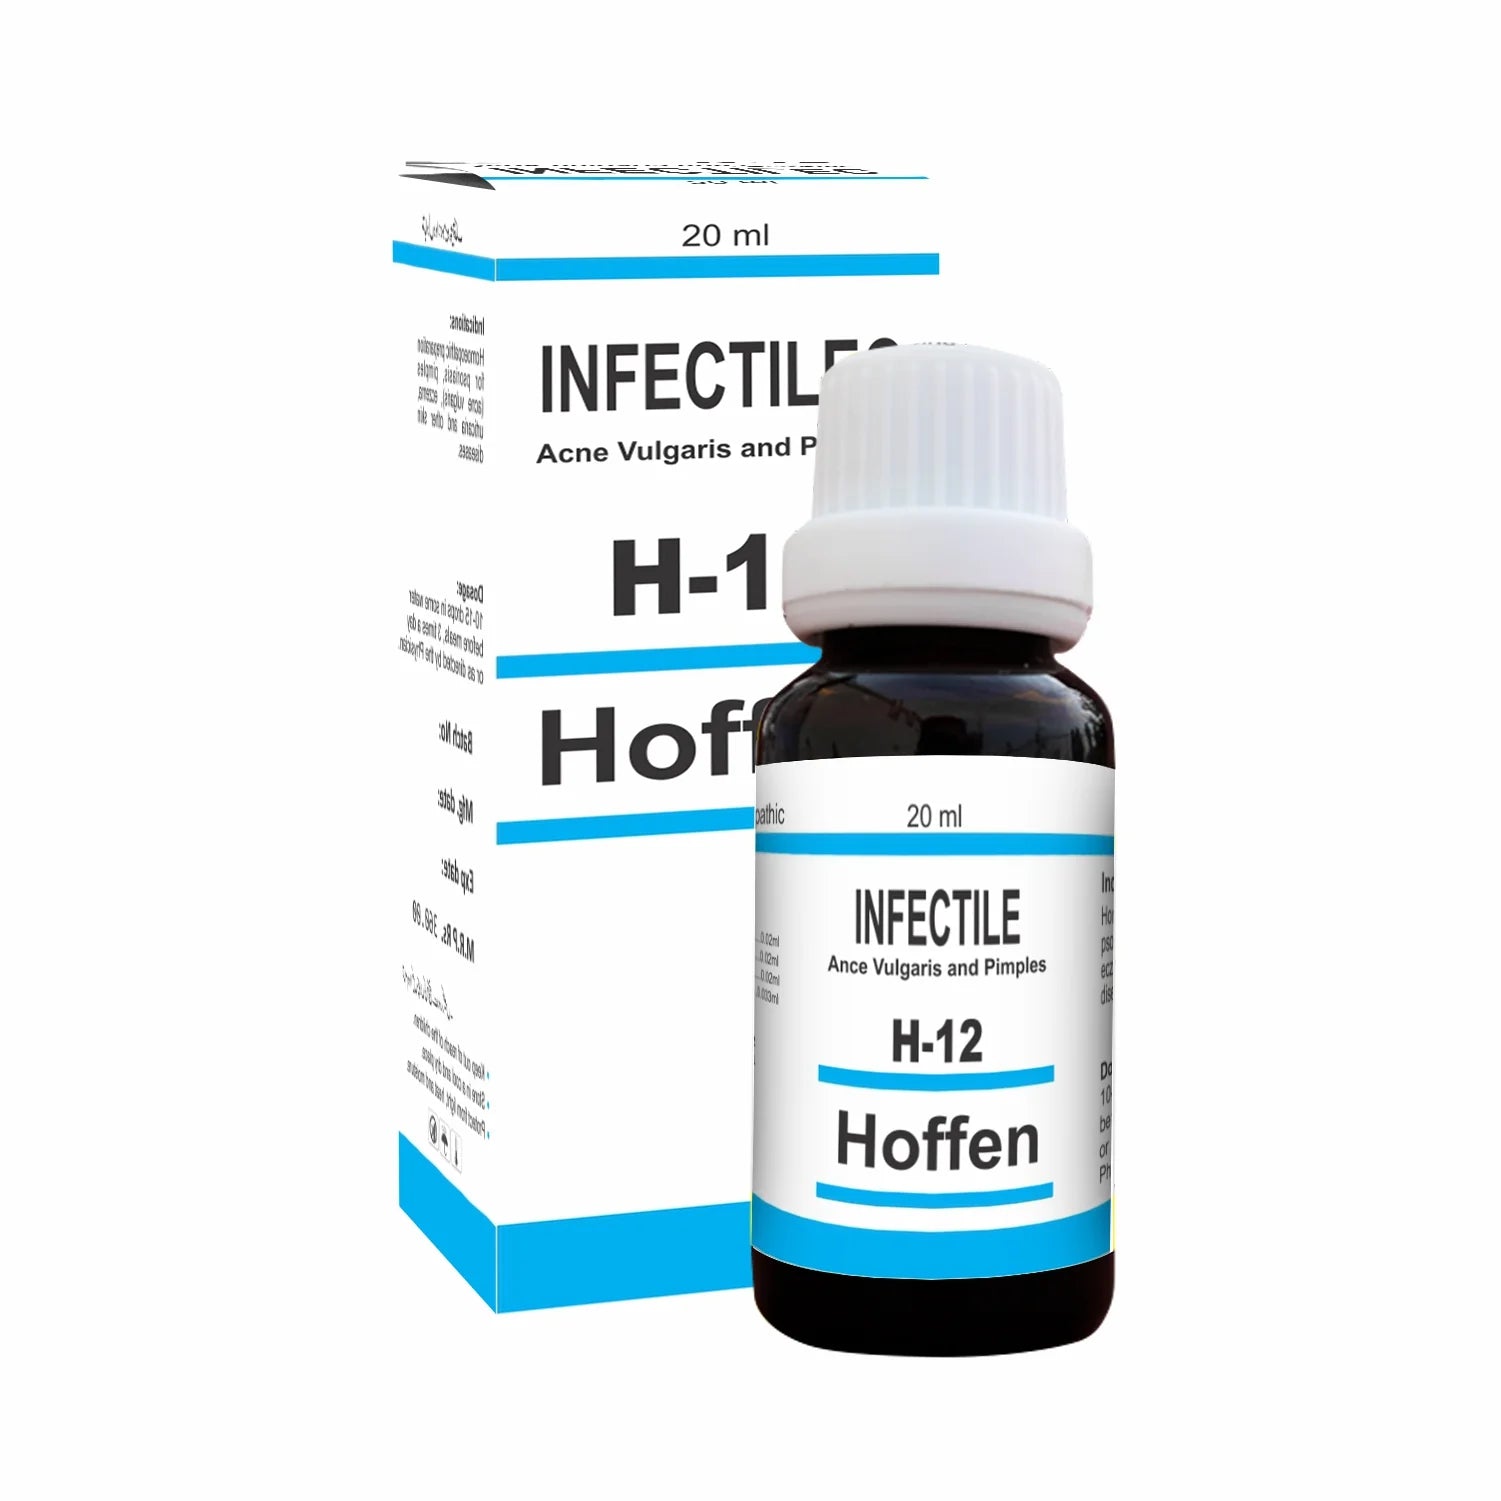 H-12 INFECTILE Drops